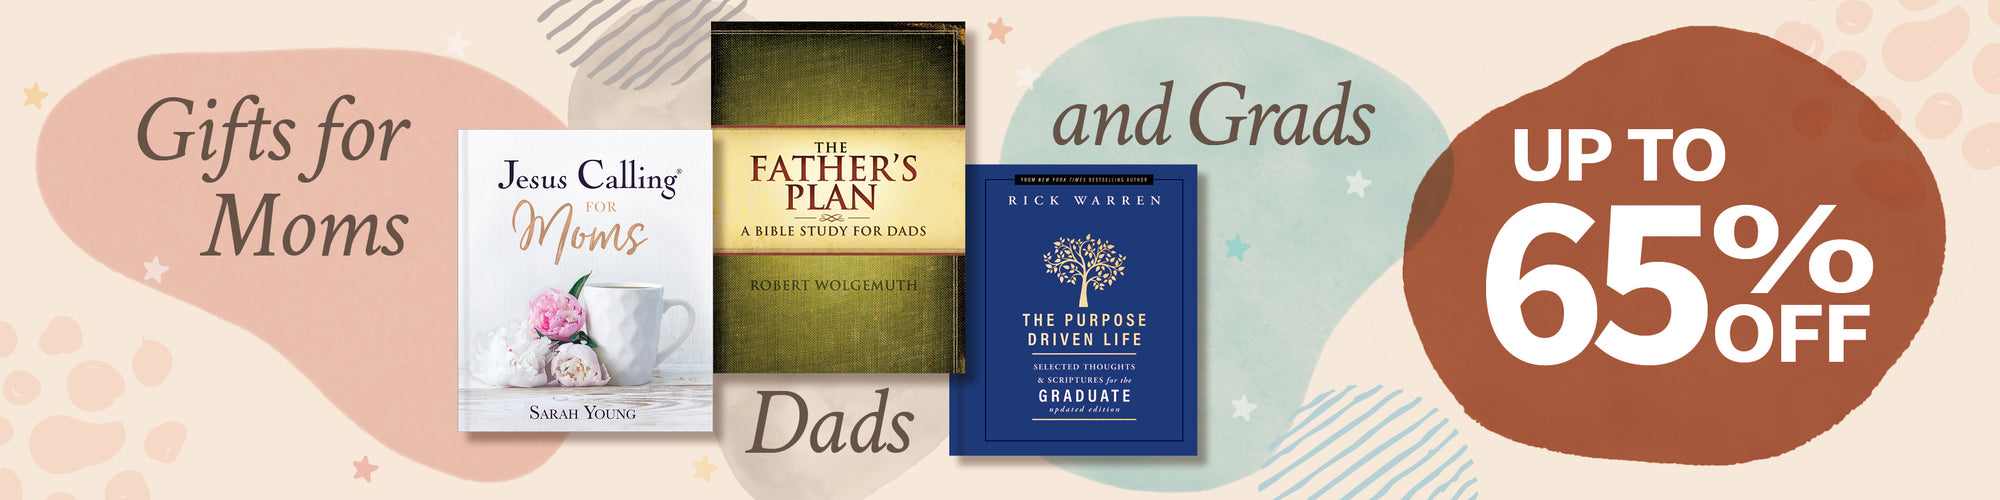 Shop the Best Christian Gifts for Mother's Day, Father's Day, and Graduation All in One Place